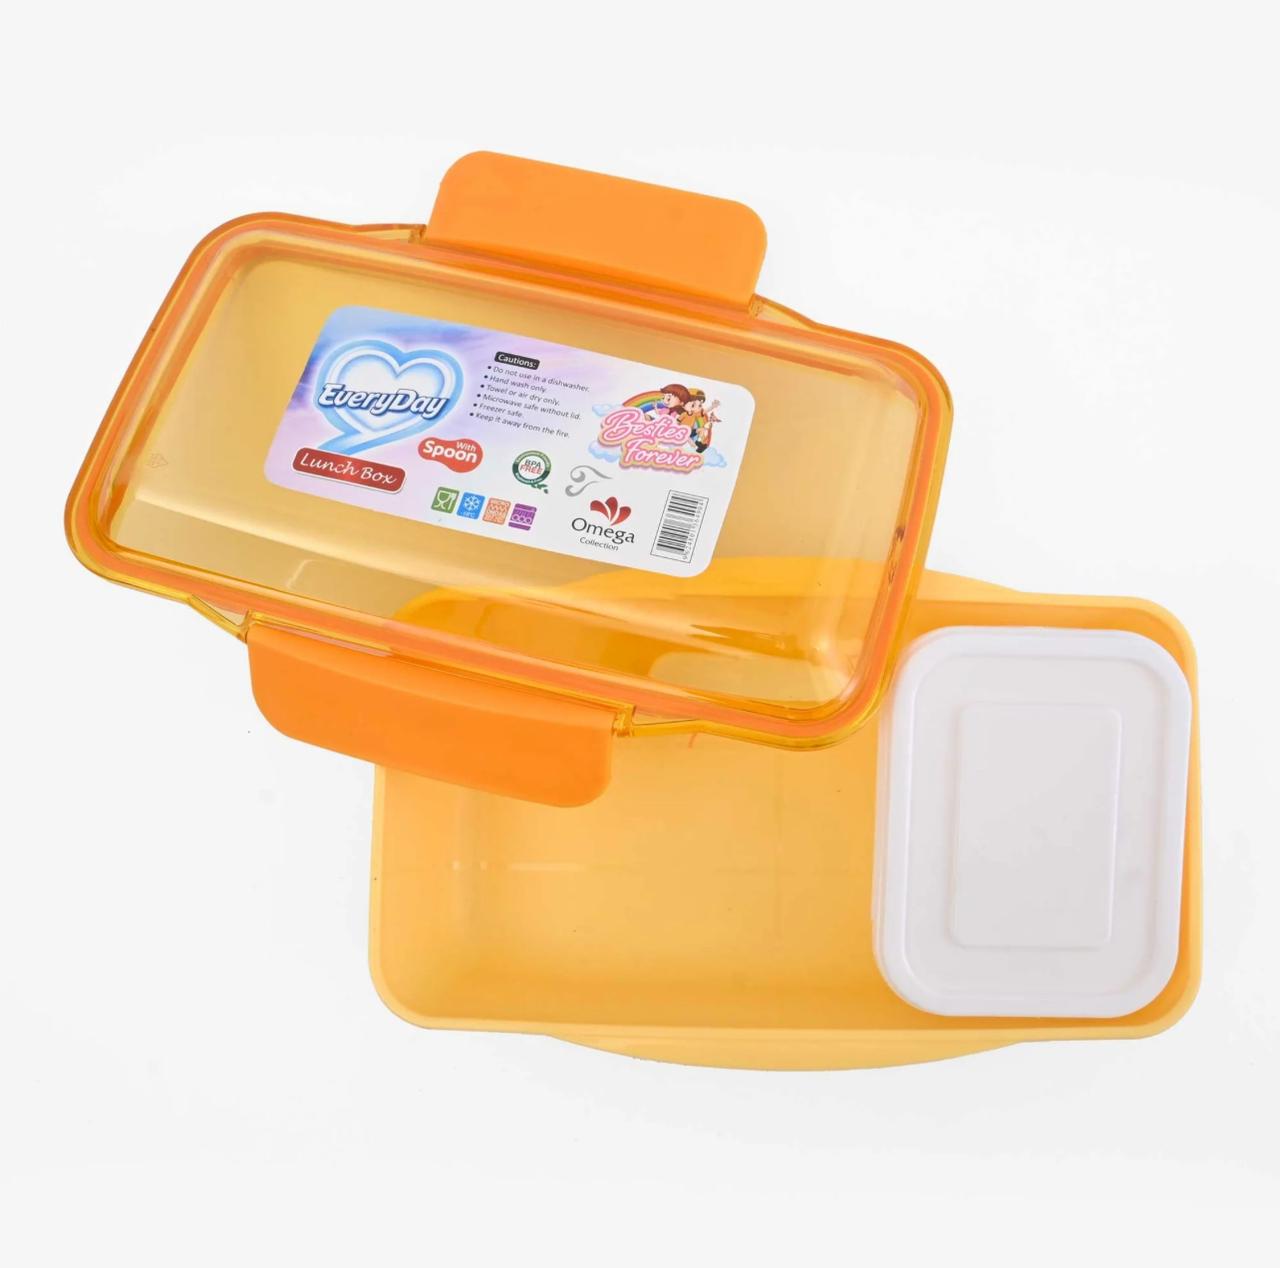 Omega lucky air tight lunch box